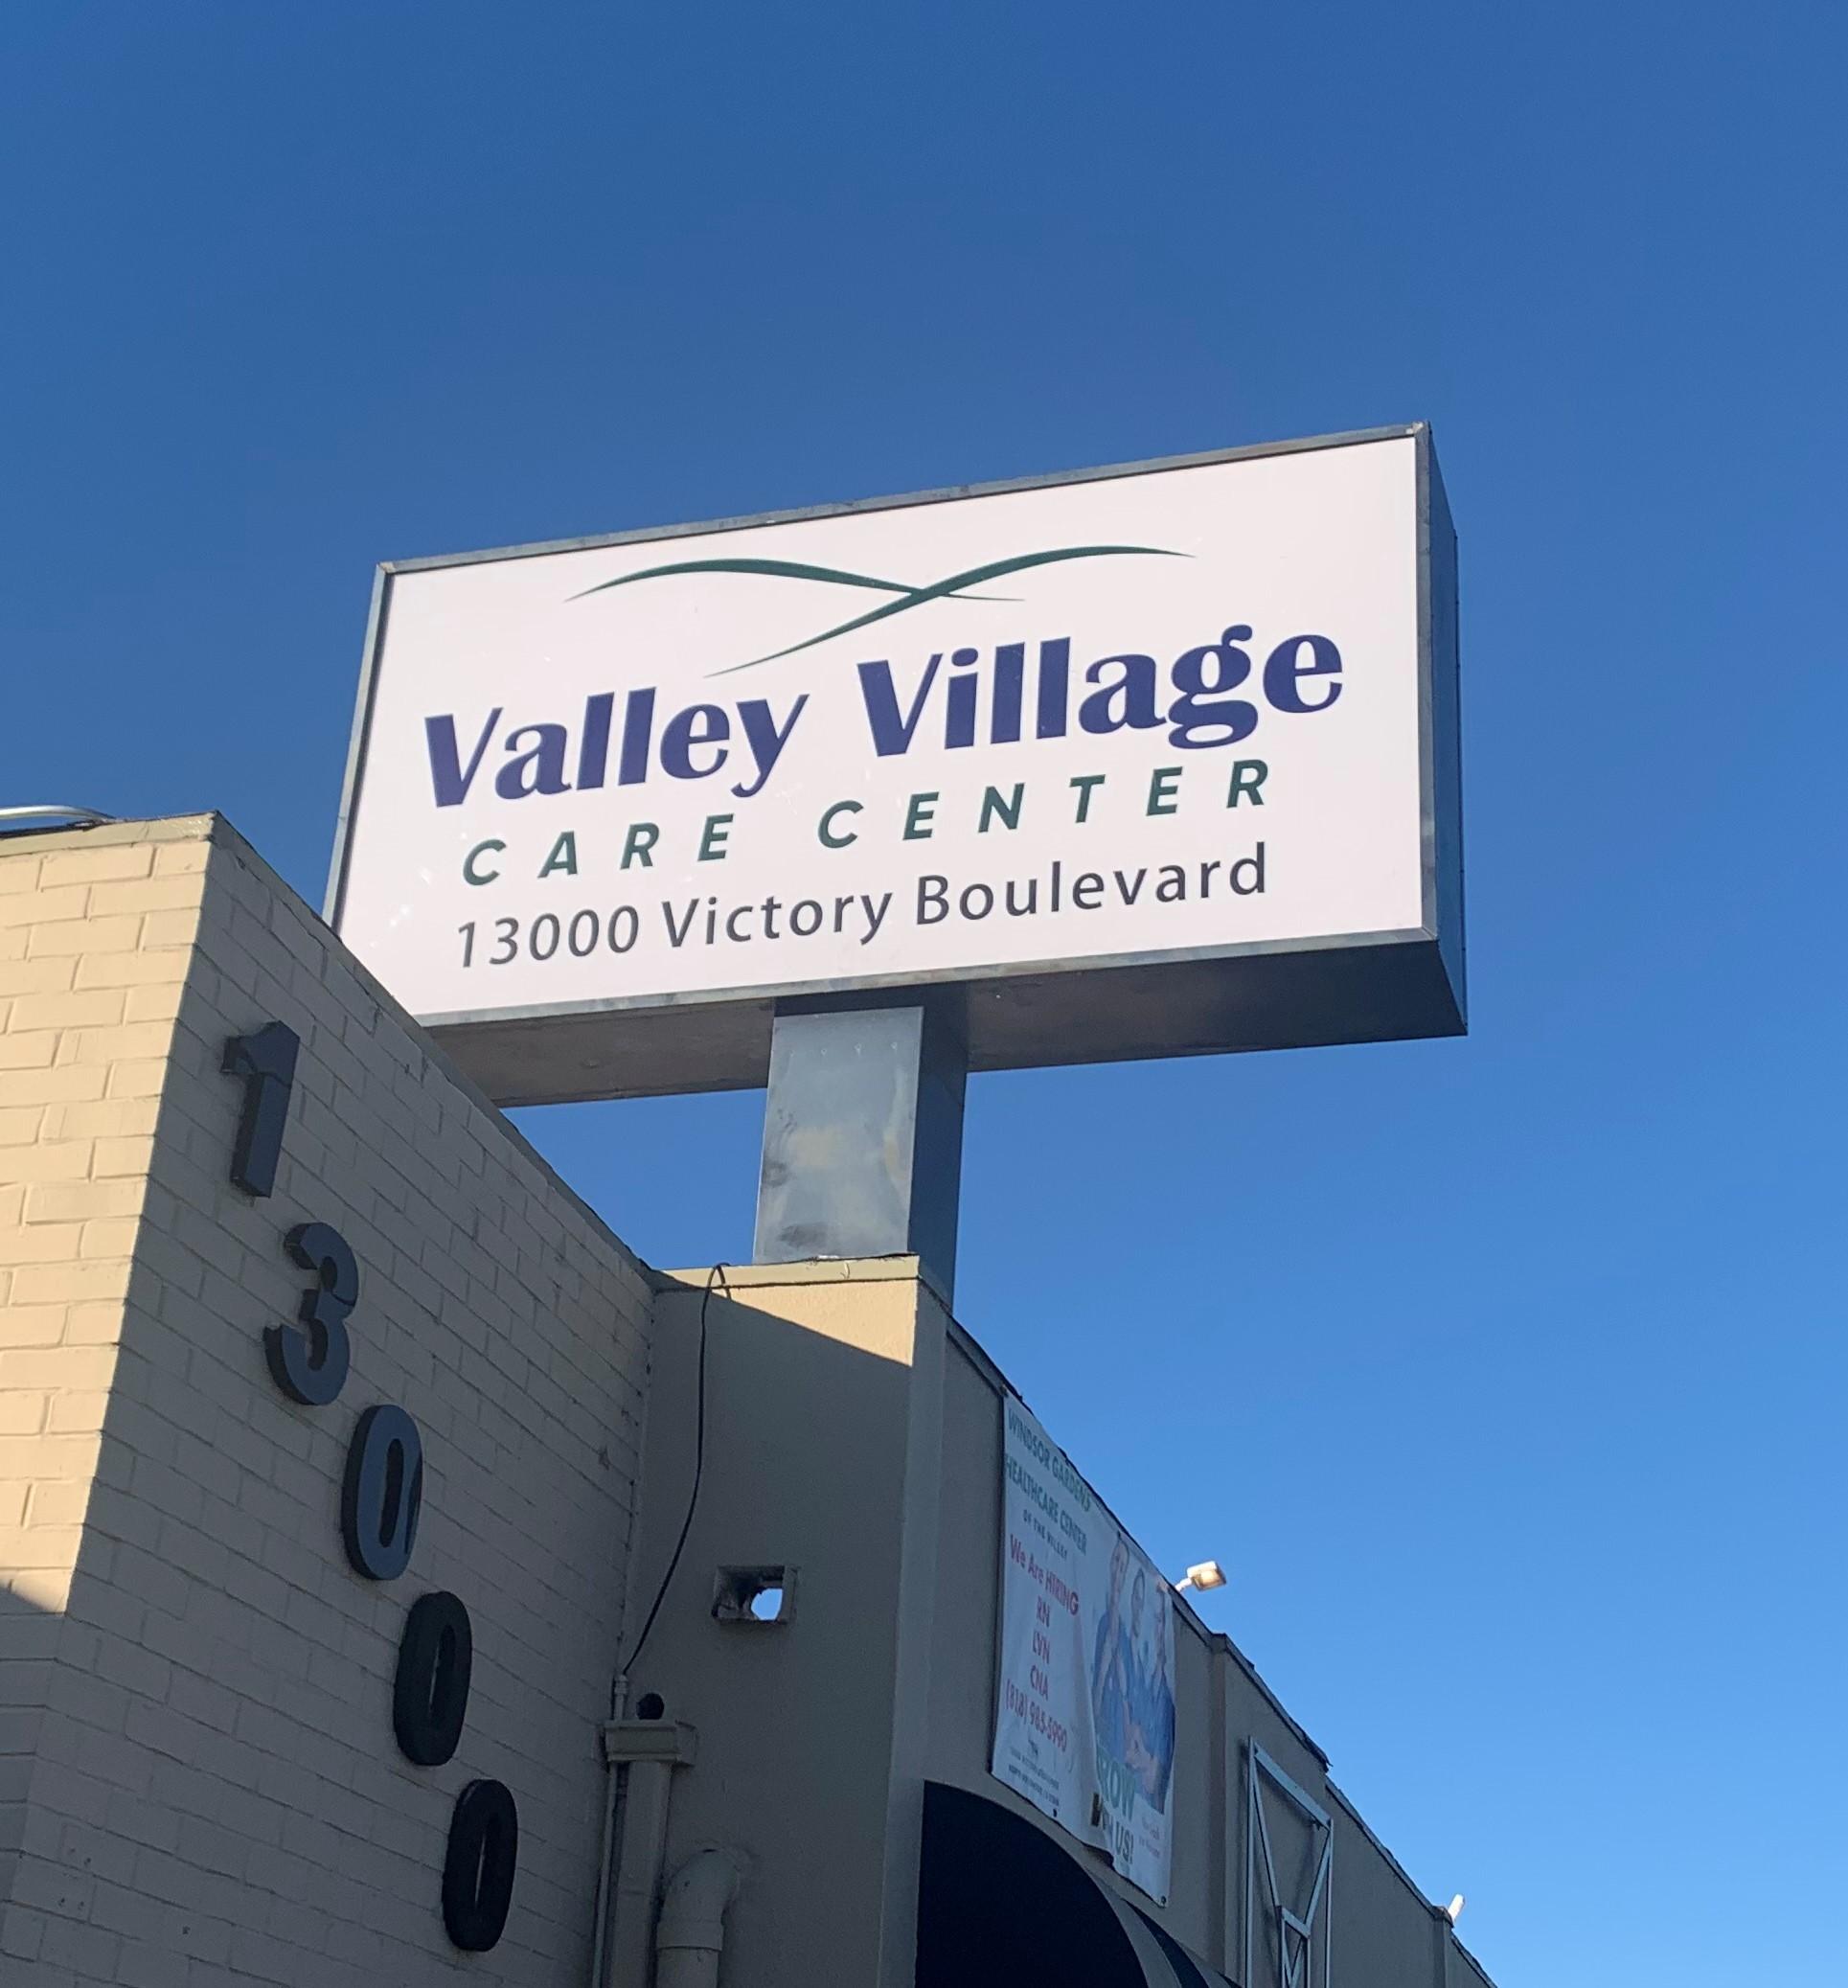 You are currently viewing Pylon Sign for Valley Village Care Center in North Hollywood